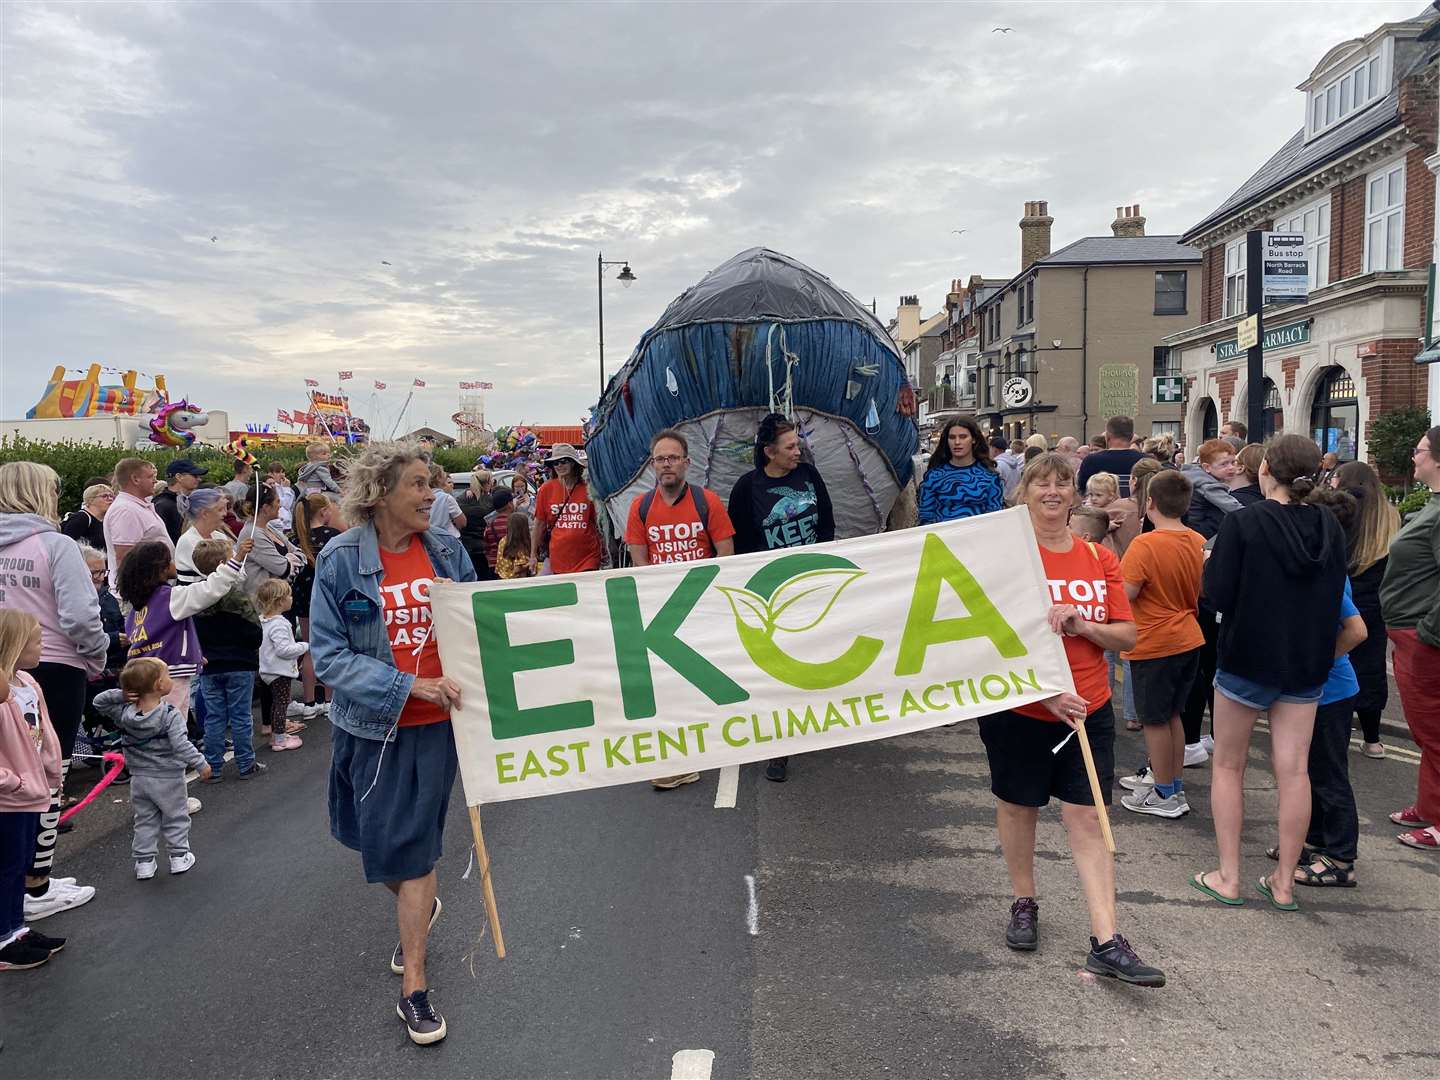 A blue whale joined members of East Kent Climate Action